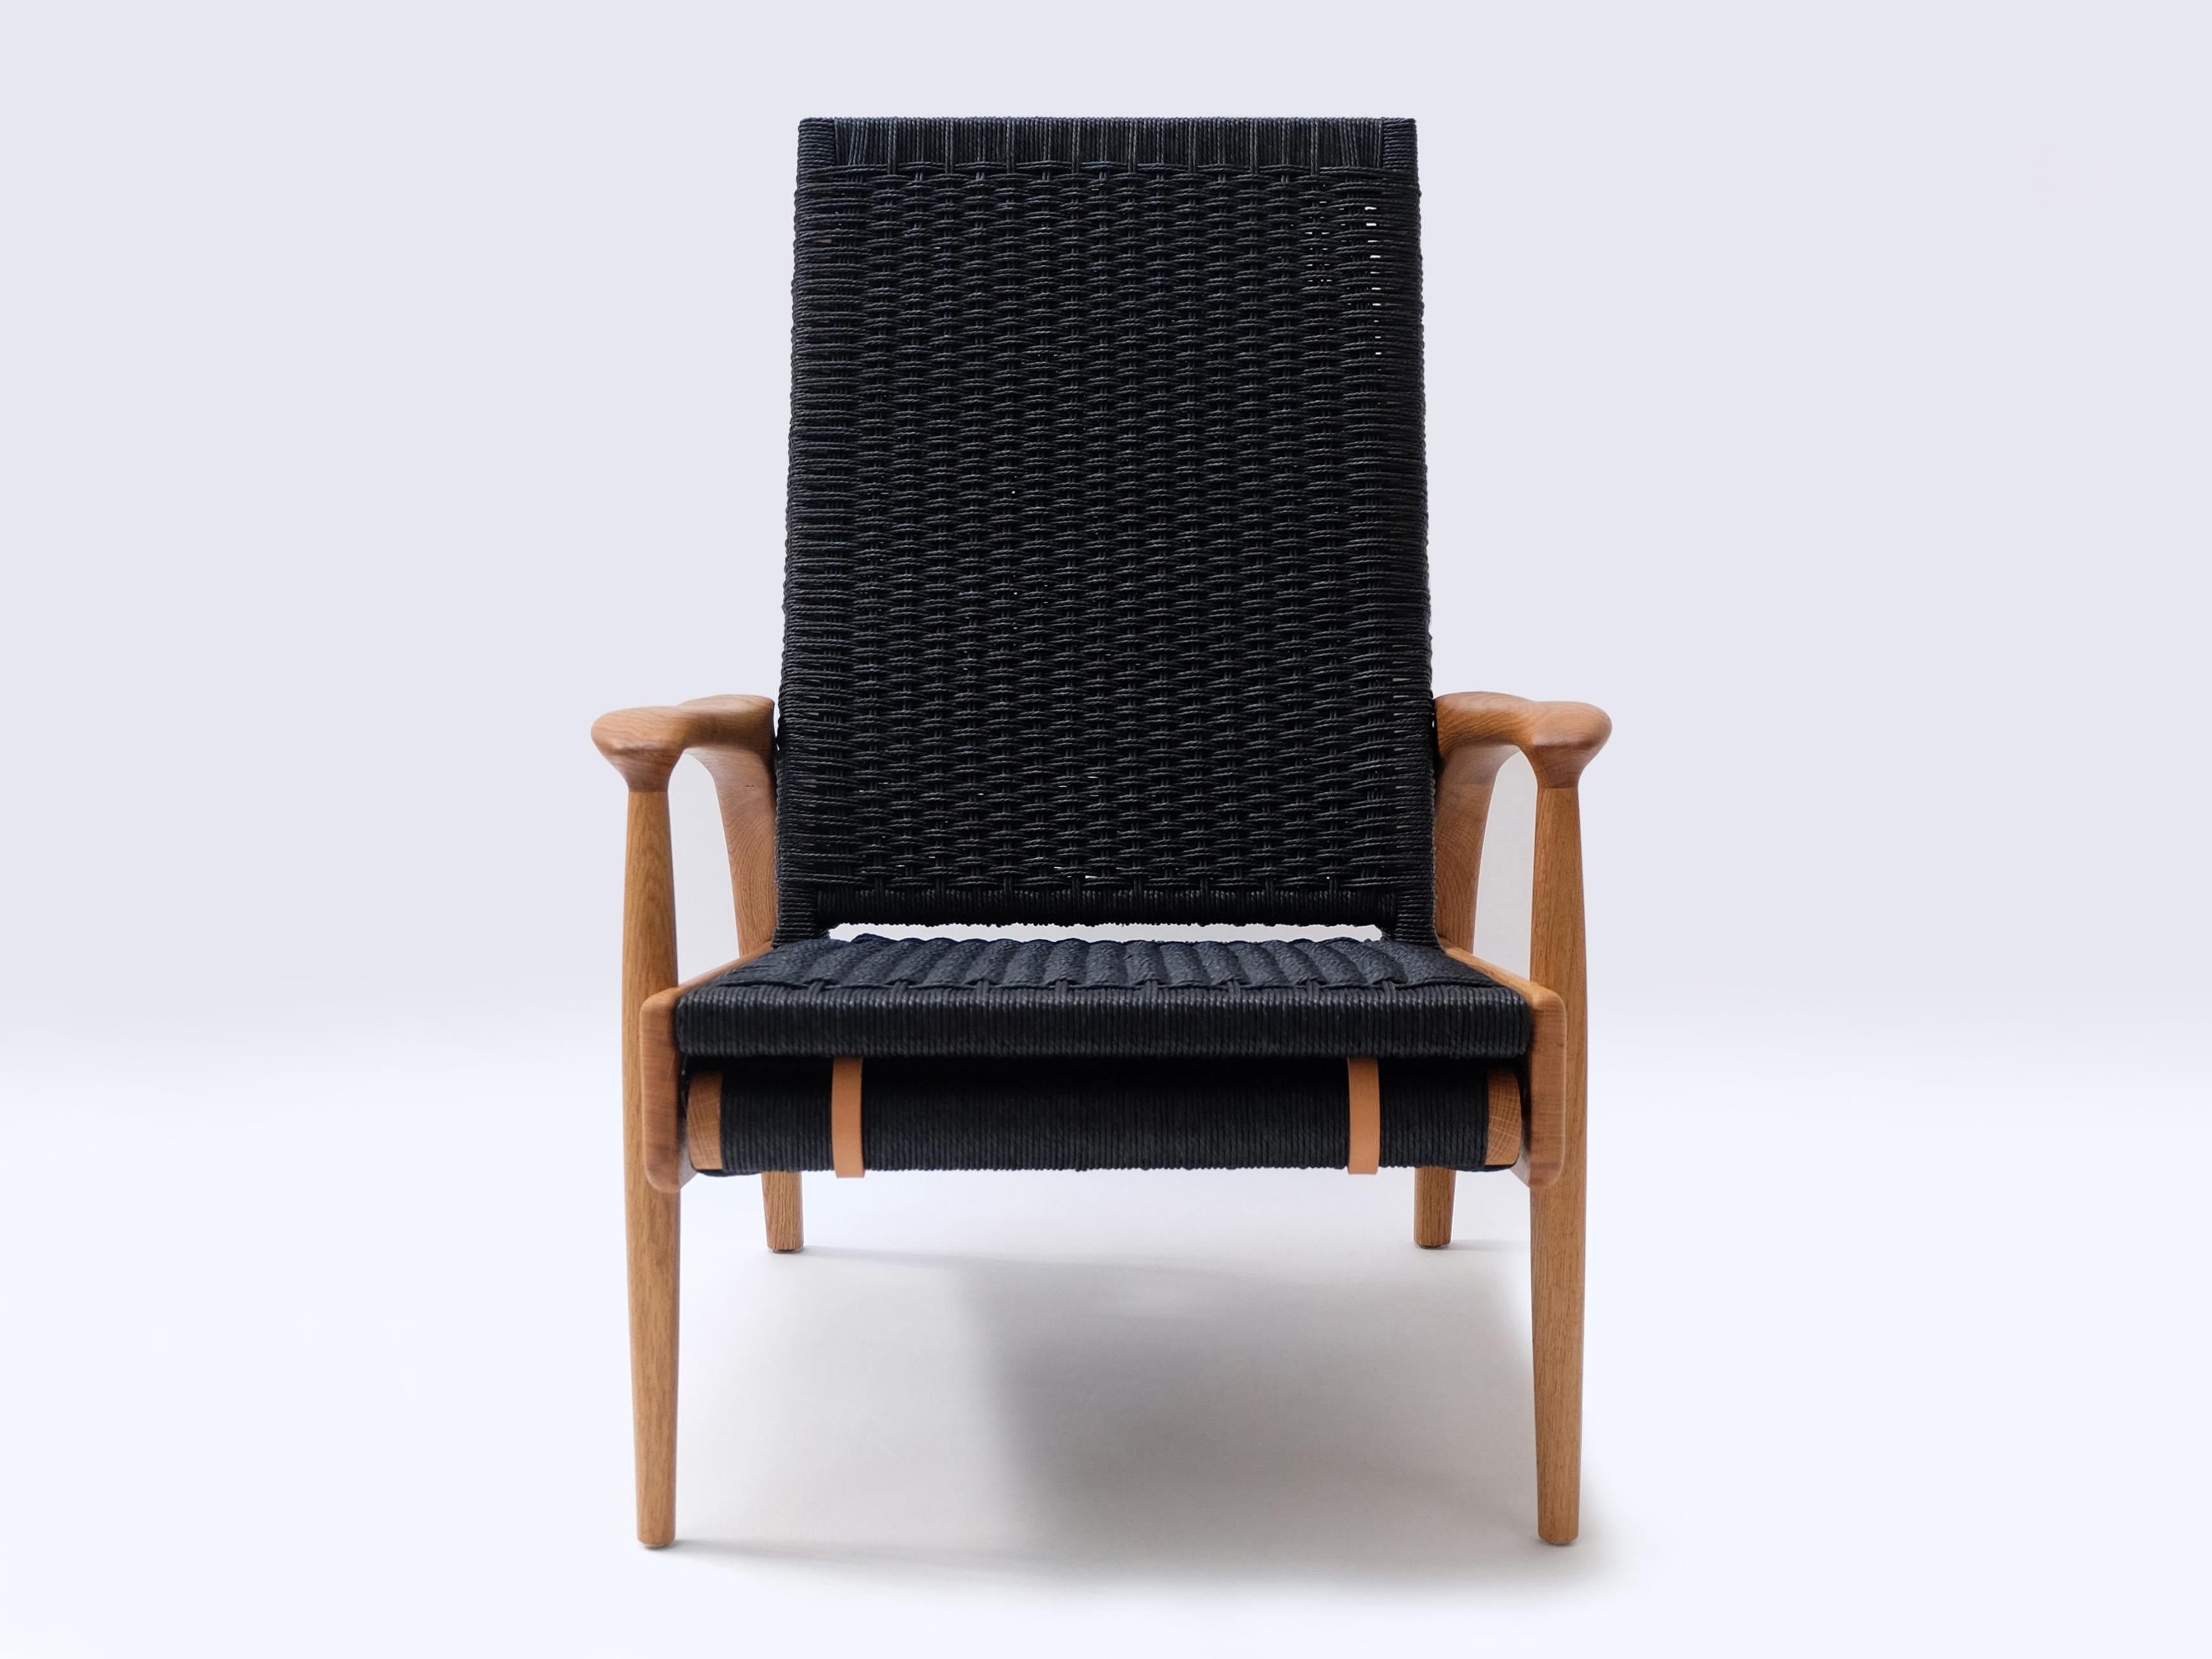 Custom-Made Handcrafted Reclining Eco Lounge Chair FENDRIK by Studio180degree
Shown in Sustainable Solid Natural Oiled Oak and Contrasting Original Black Danish Cord

Noble - Tactile – Refined - Sustainable
Reclining Eco lounge chair FENDRIK is a